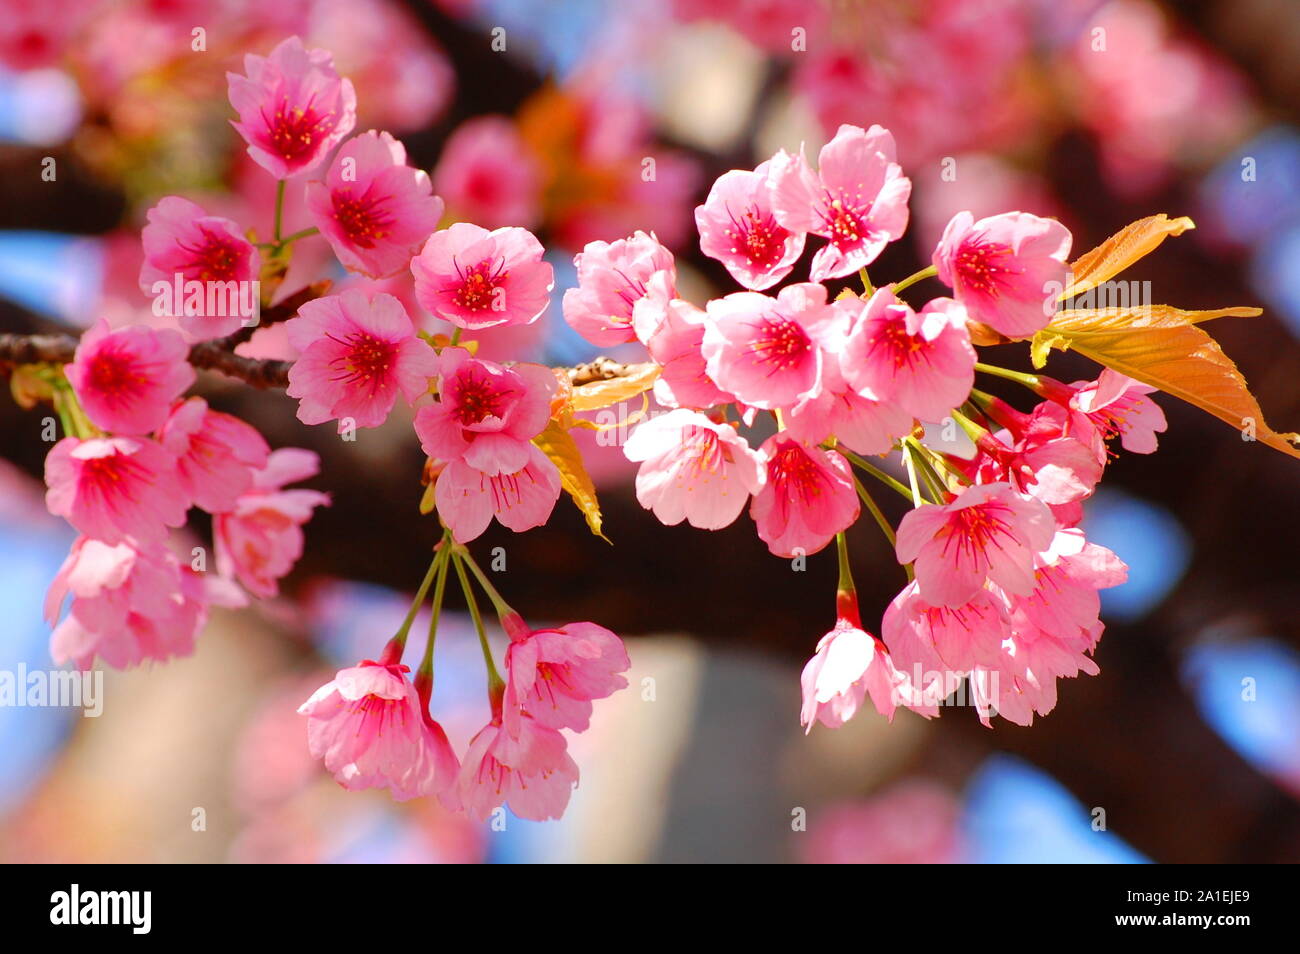 Pink Cherry Blossom spring season in Japan beautiful nature flowers shoot close up with blur background Stock Photo